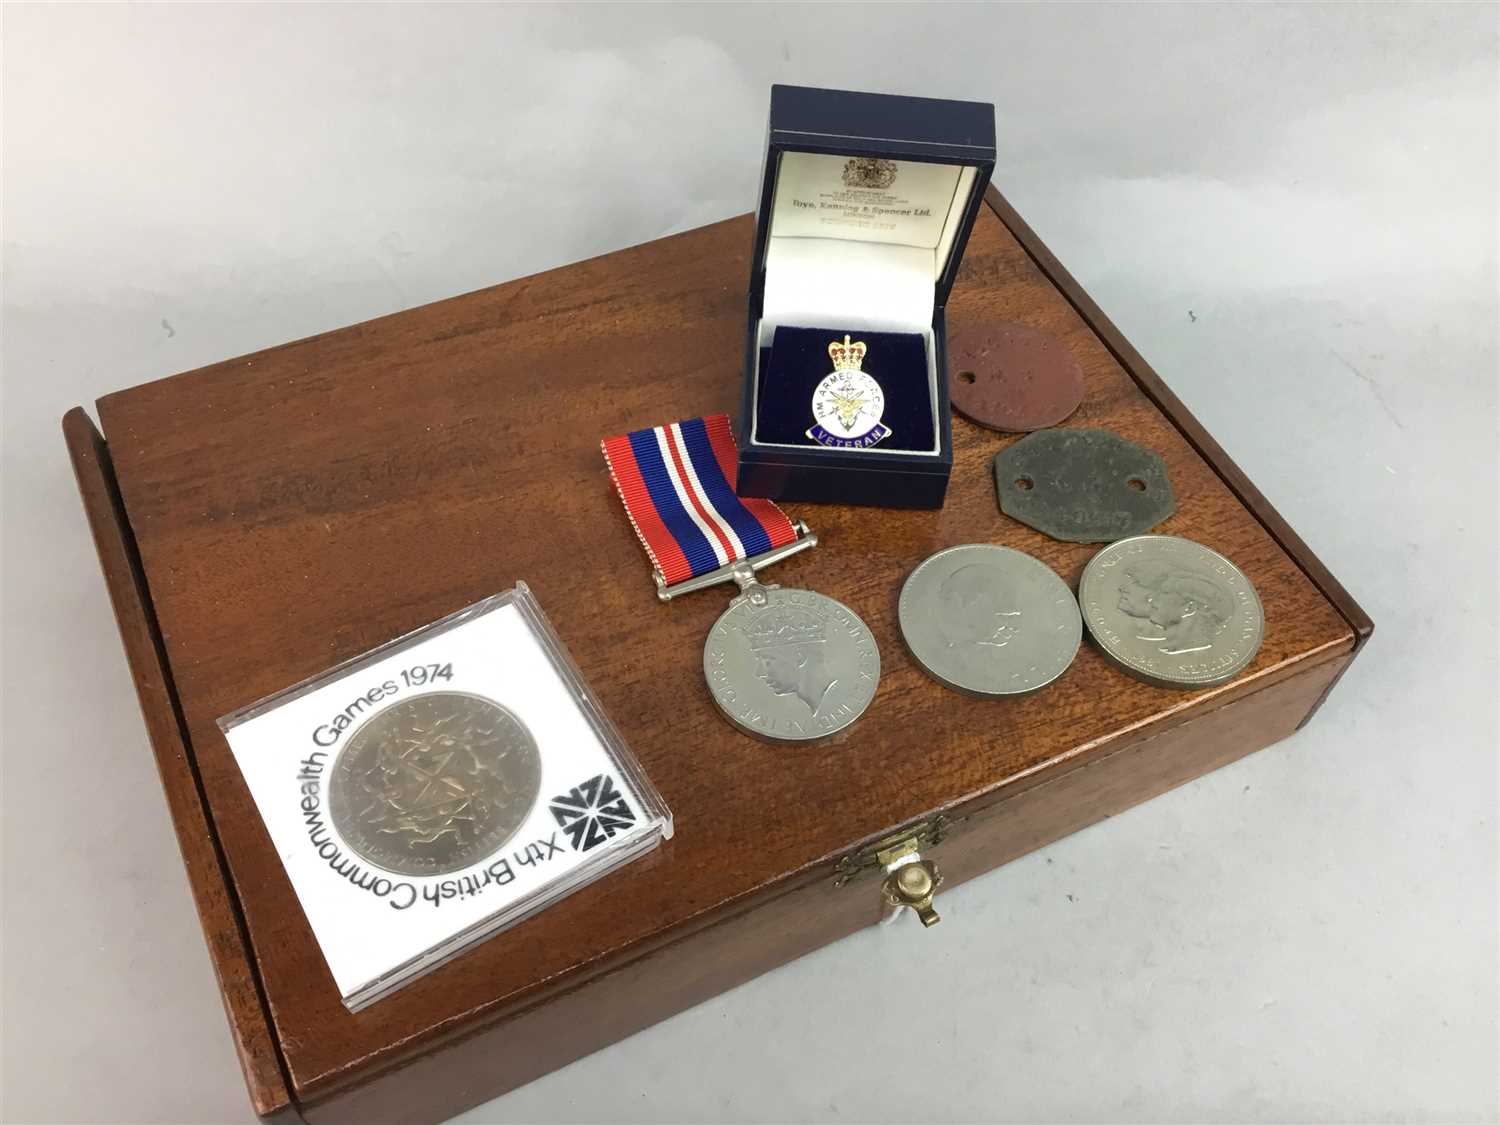 Lot 24 - A WWII MEDAL, BADGE AND COMMEMORATIVE COINS